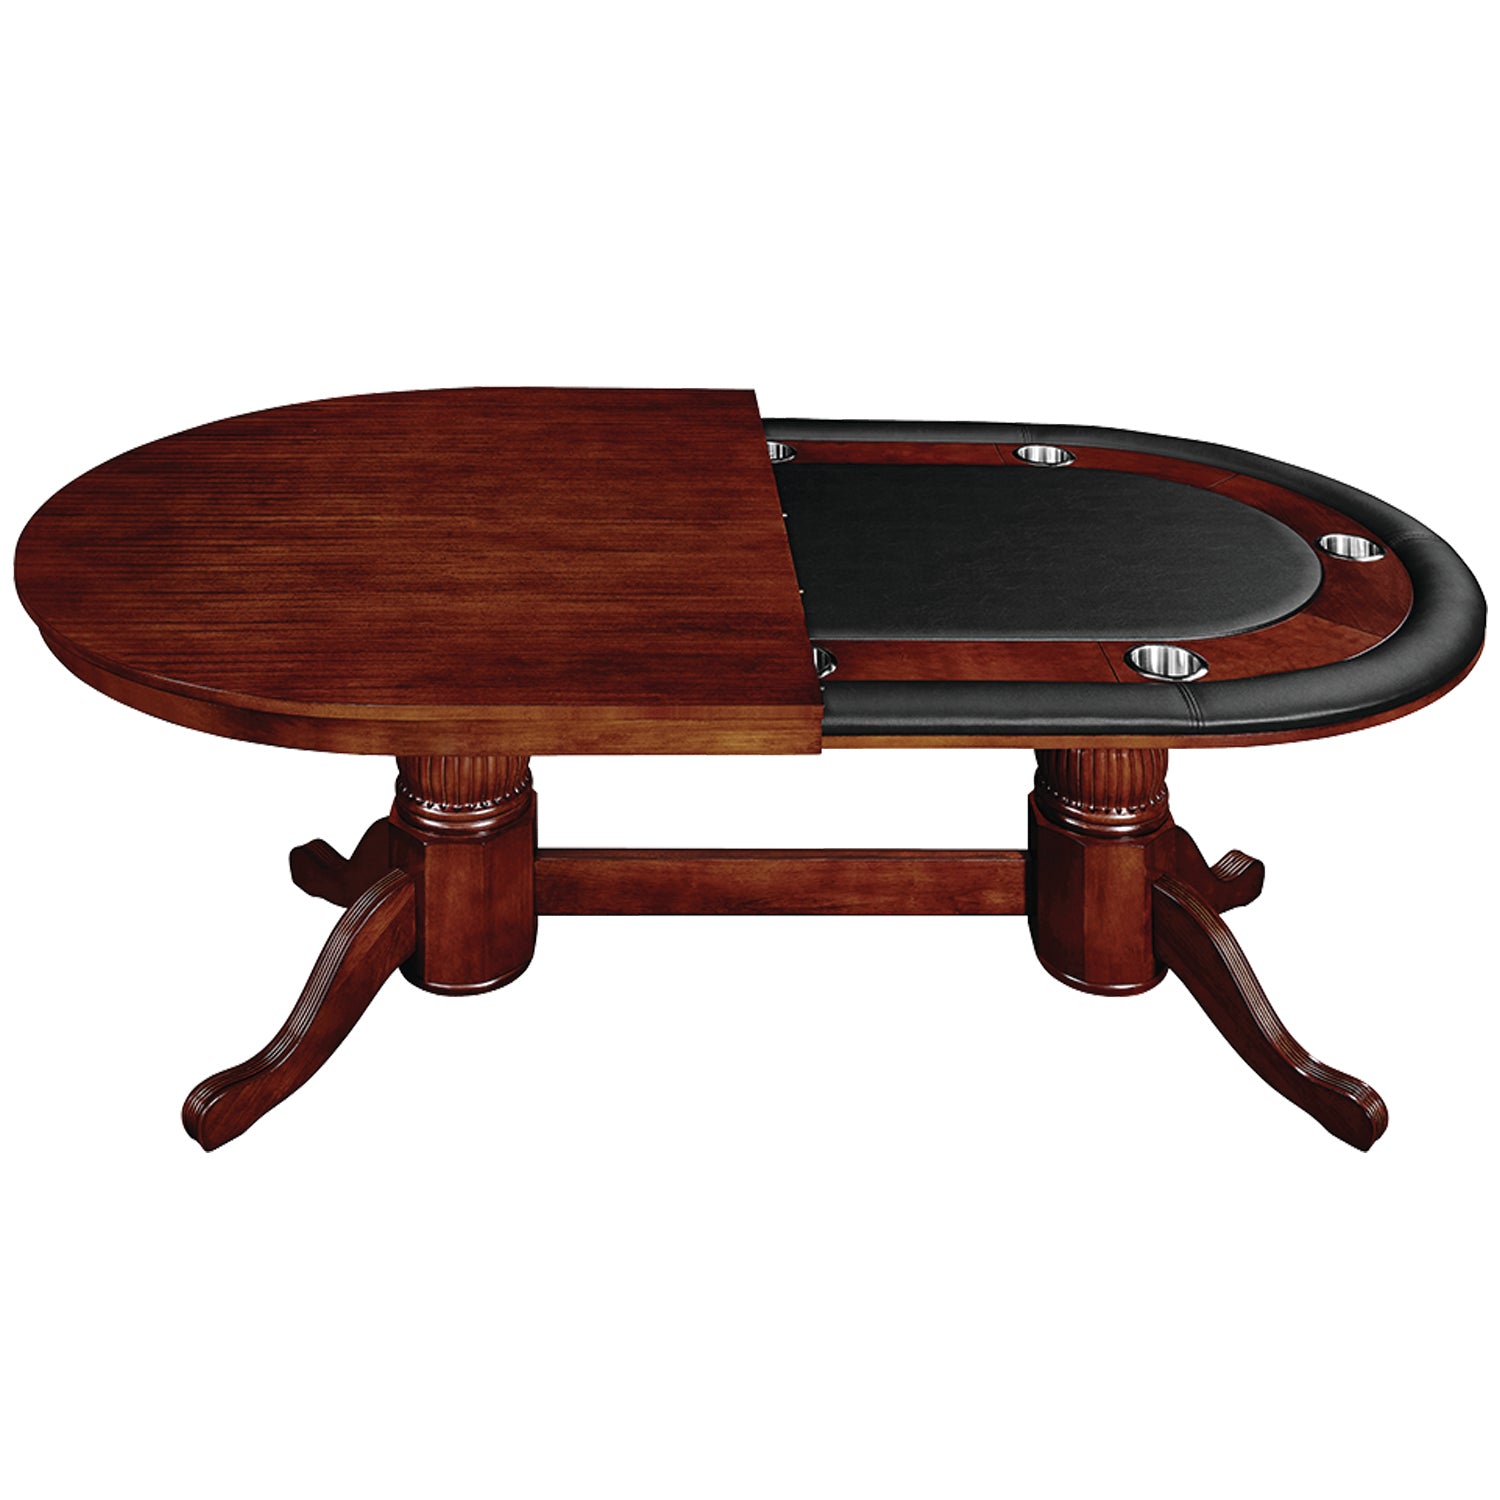 RAM Game Room 84" Texas Hold'em Game Table with Dining Top - English Tudor